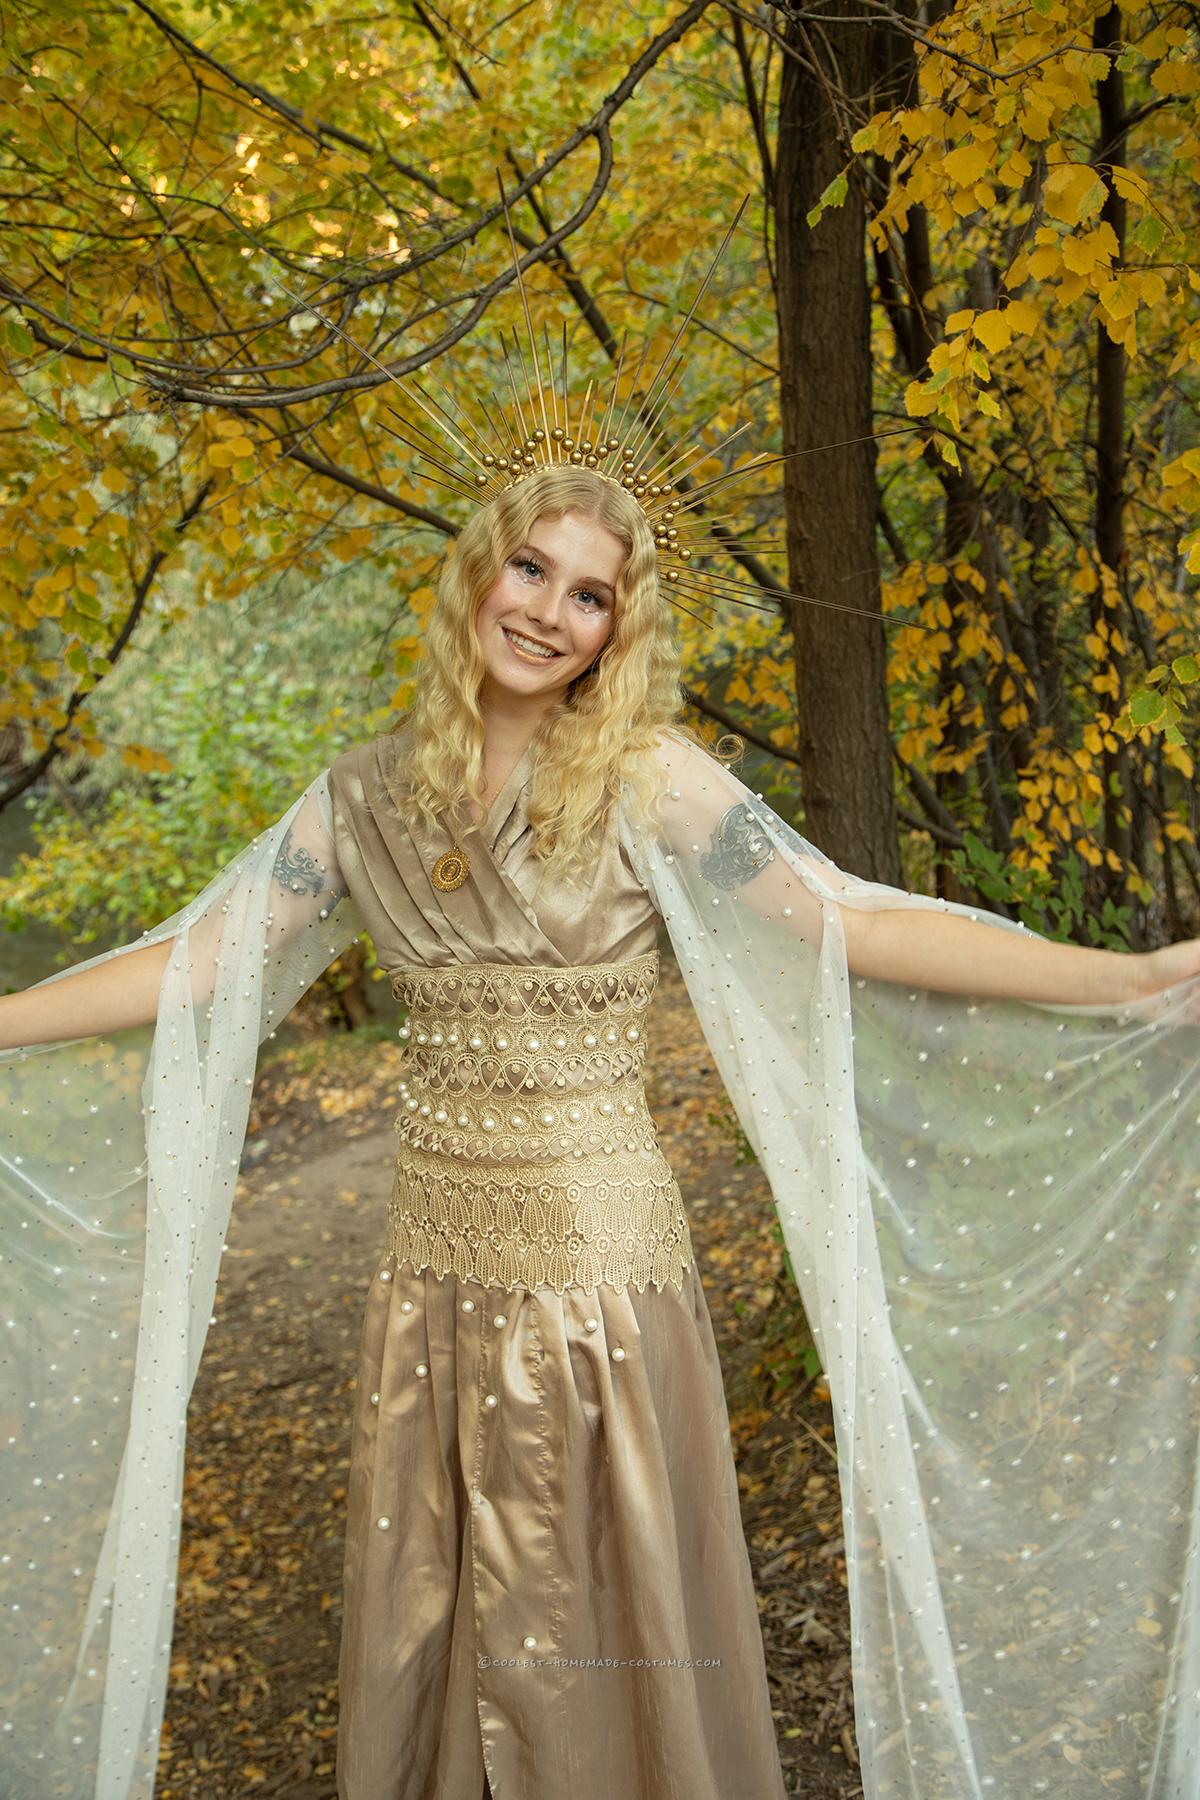 From Curtains to Goddess: A DIY Costume Creation